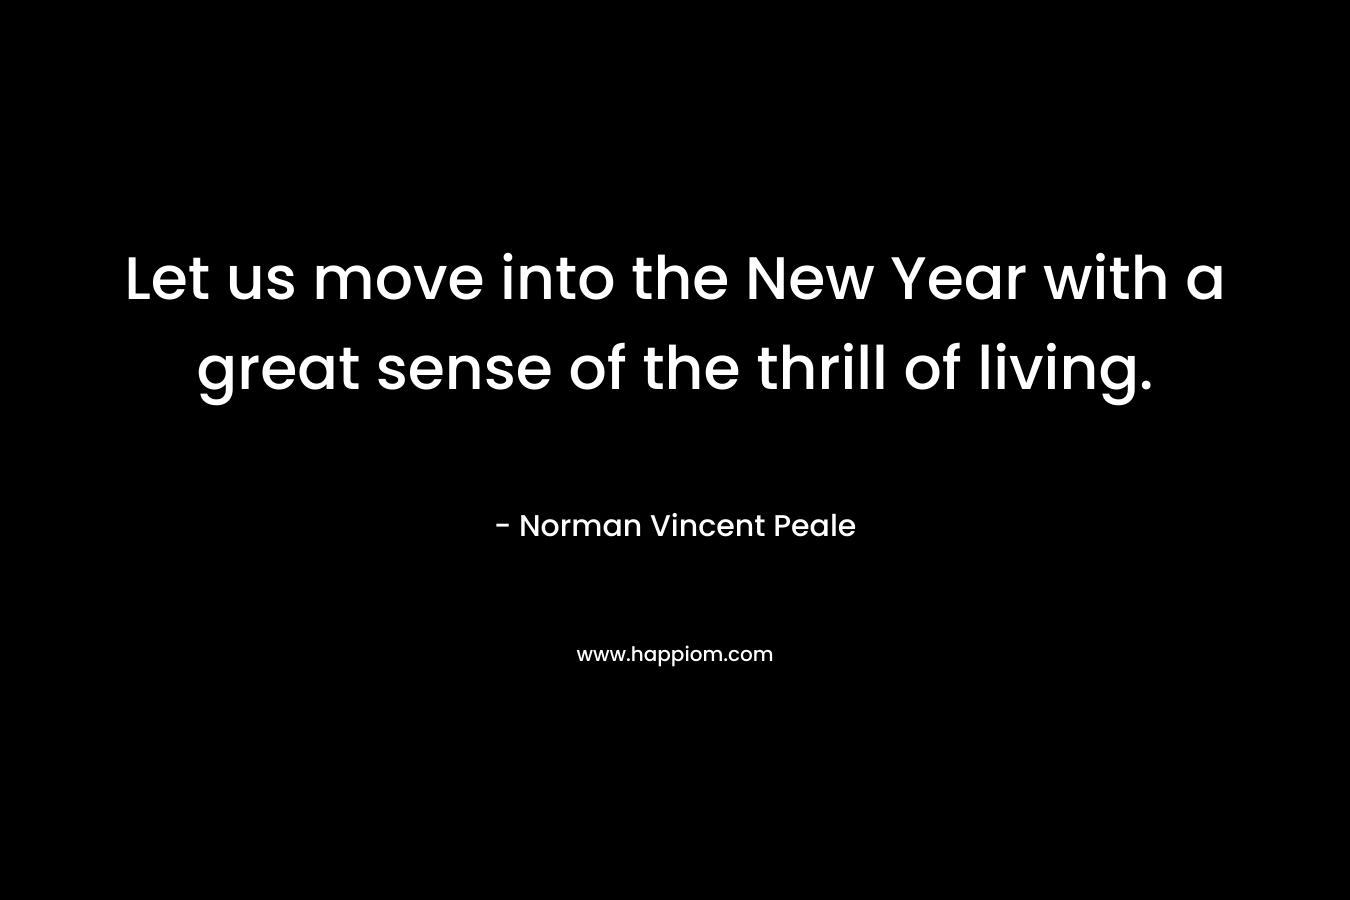 Let us move into the New Year with a great sense of the thrill of living. – Norman Vincent Peale